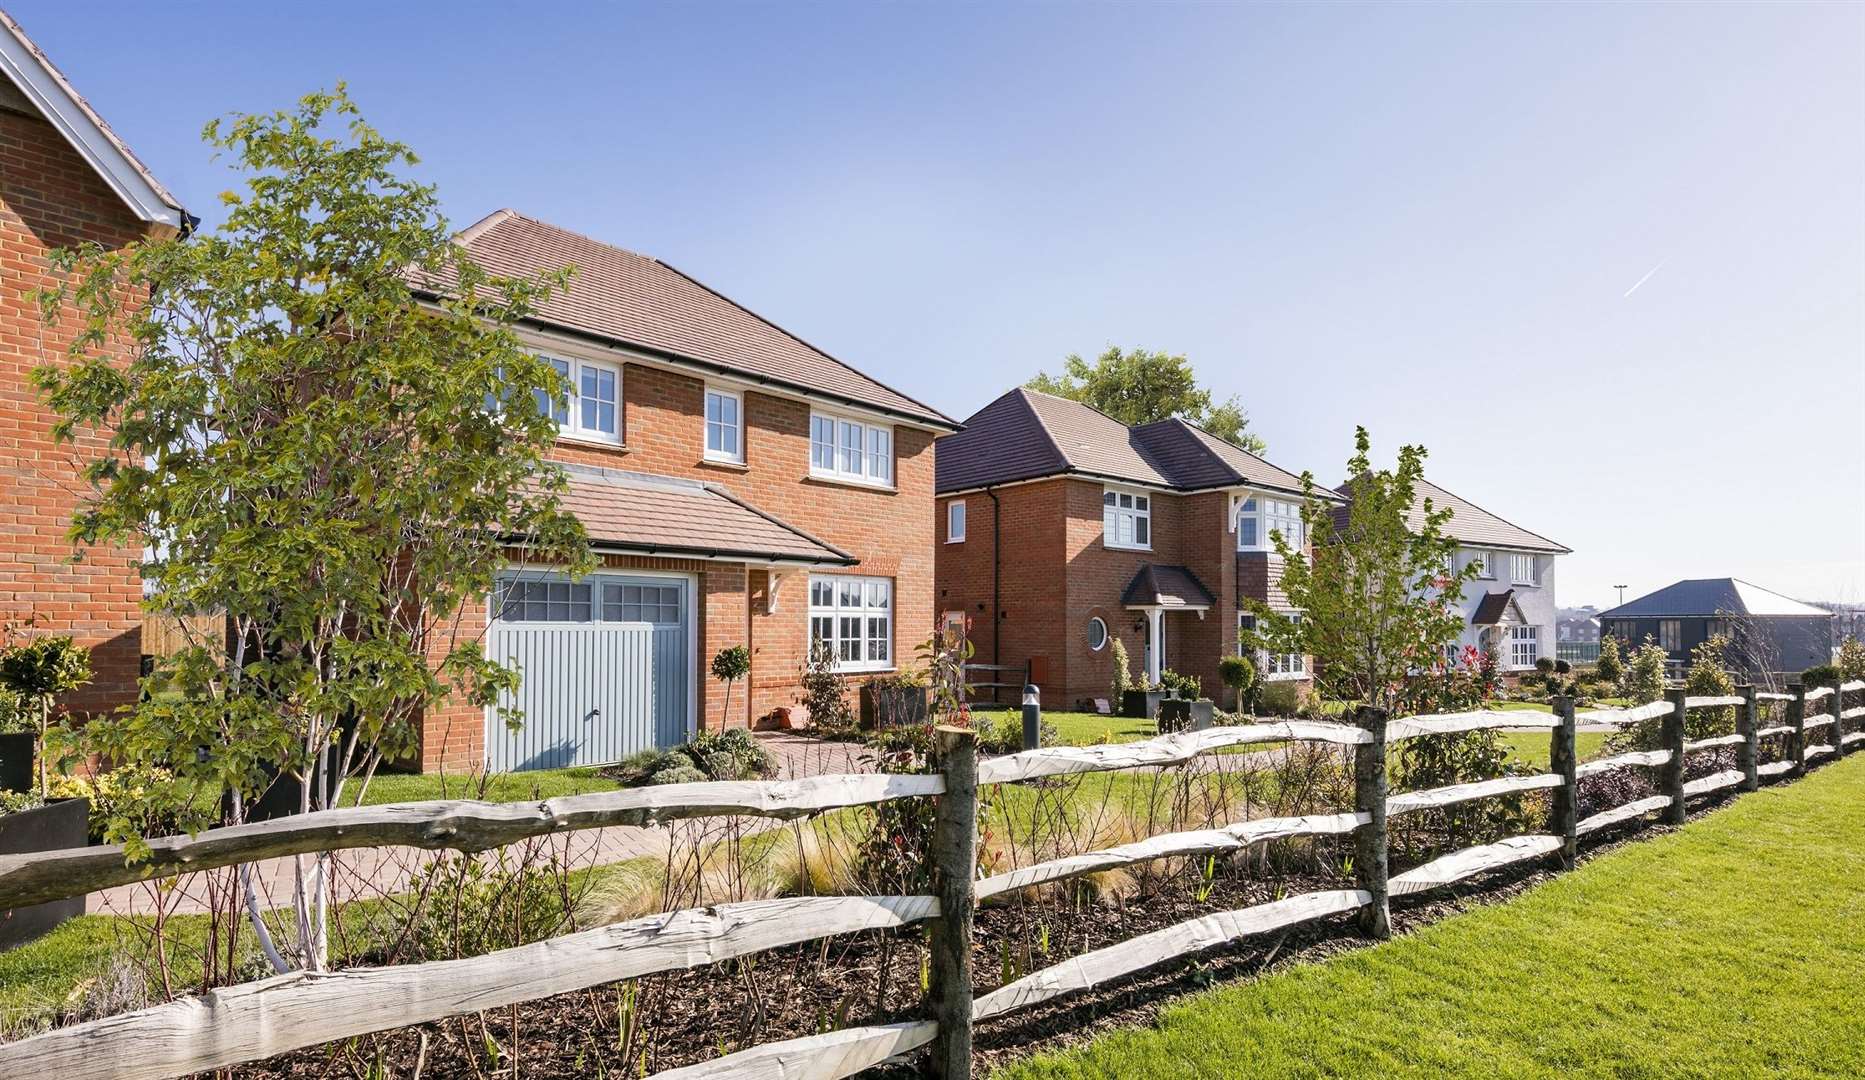 These new homes on the Kent coast are catching the attention of buyers at all stages of the property ladder.